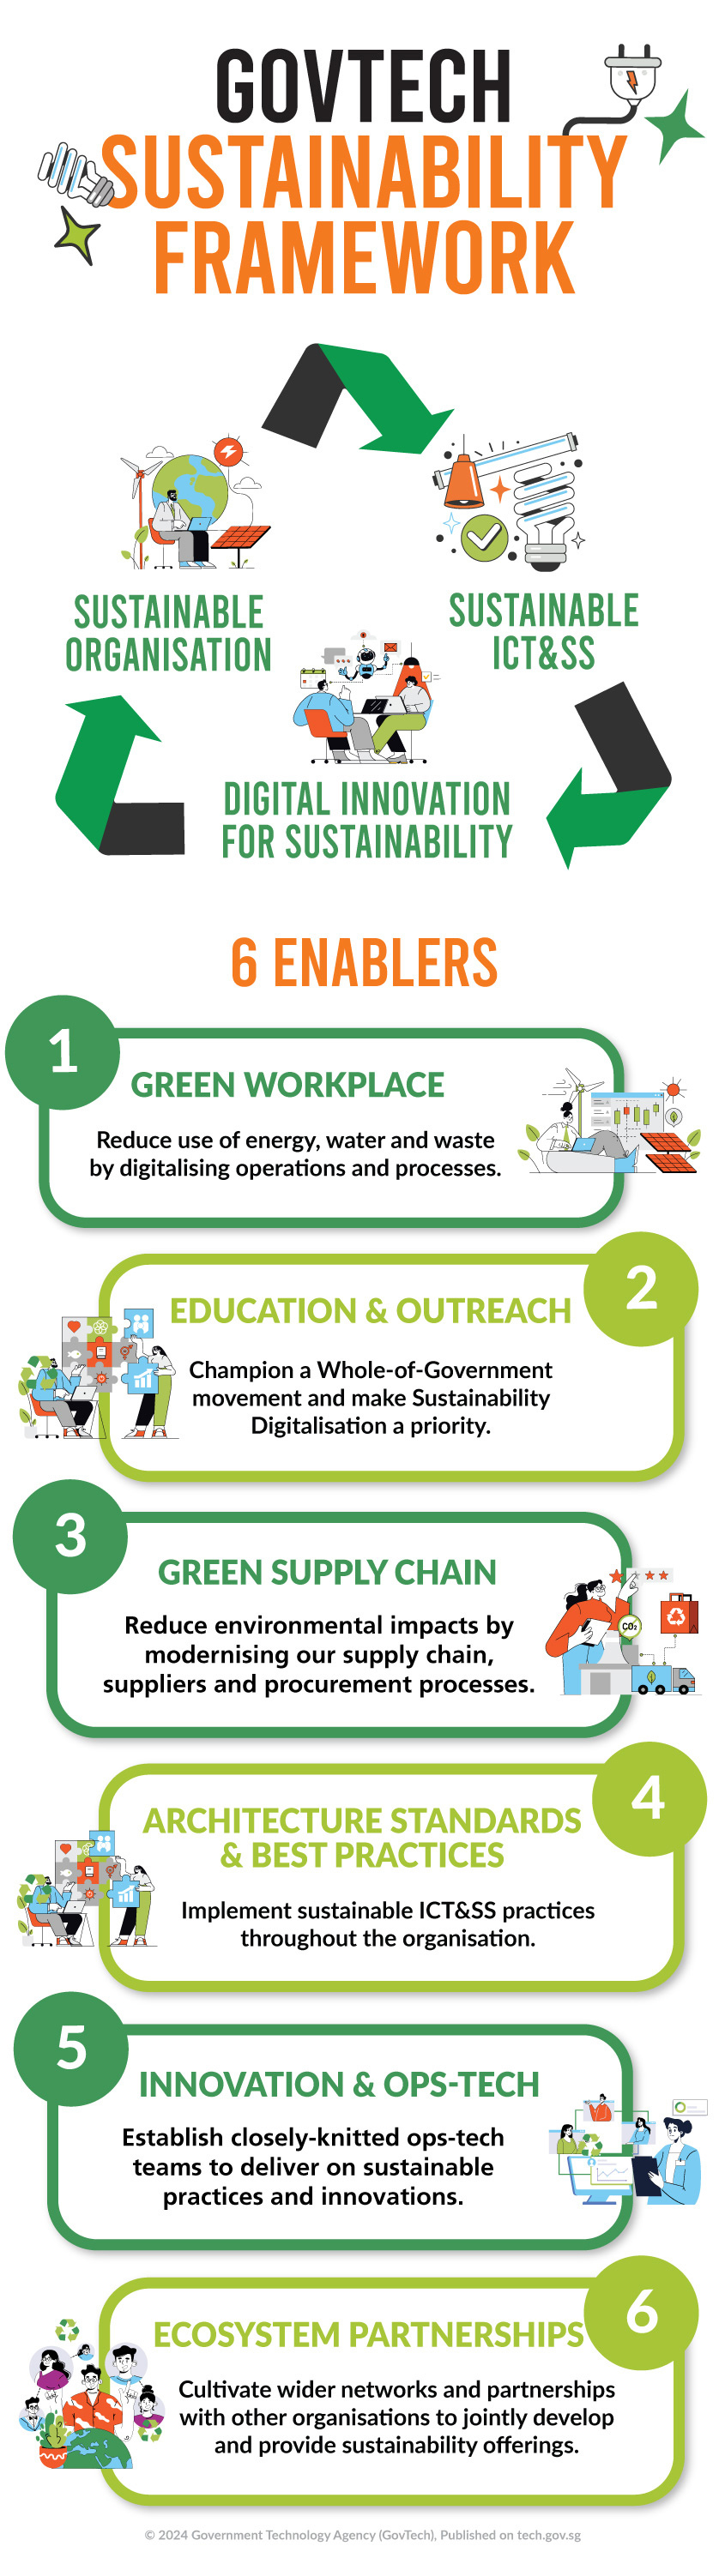 GovTech sustainability framework to support Singapore Green Plan 2030